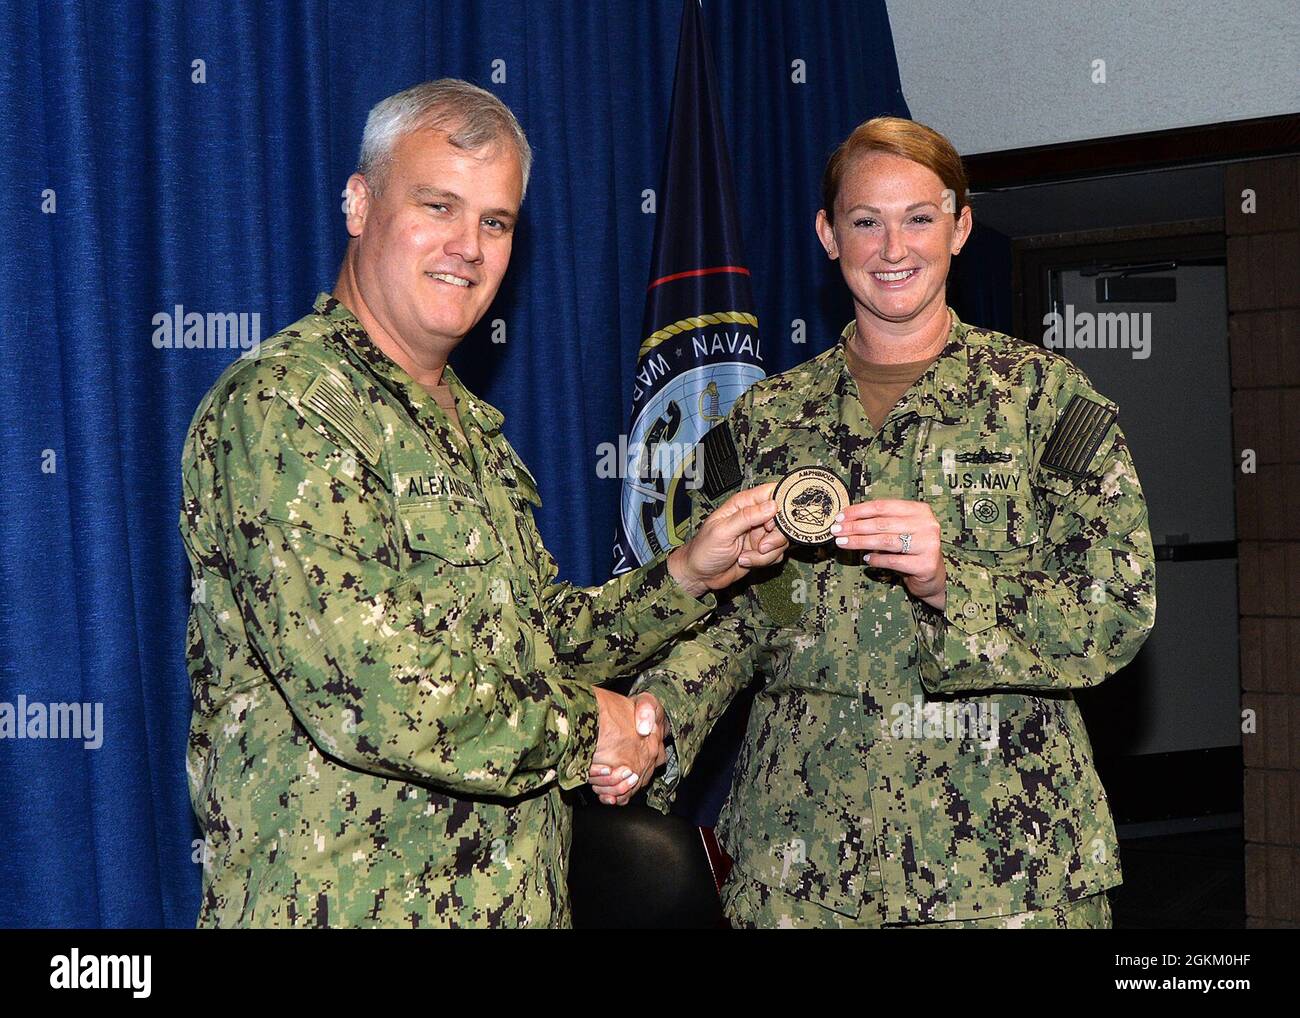 Rear Adm. Christopher Alexander, commander of Naval Surface and Mine Warfighting Development Center (SMWDC) hands an Amphibious Warfare (AMW) Warfare Tactics Instructor (WTI) patch to and congratulates Lt. Krista Hebenstreit during a WTI graduation ceremony held onboard Naval Station San Diego May 21st. Stock Photo